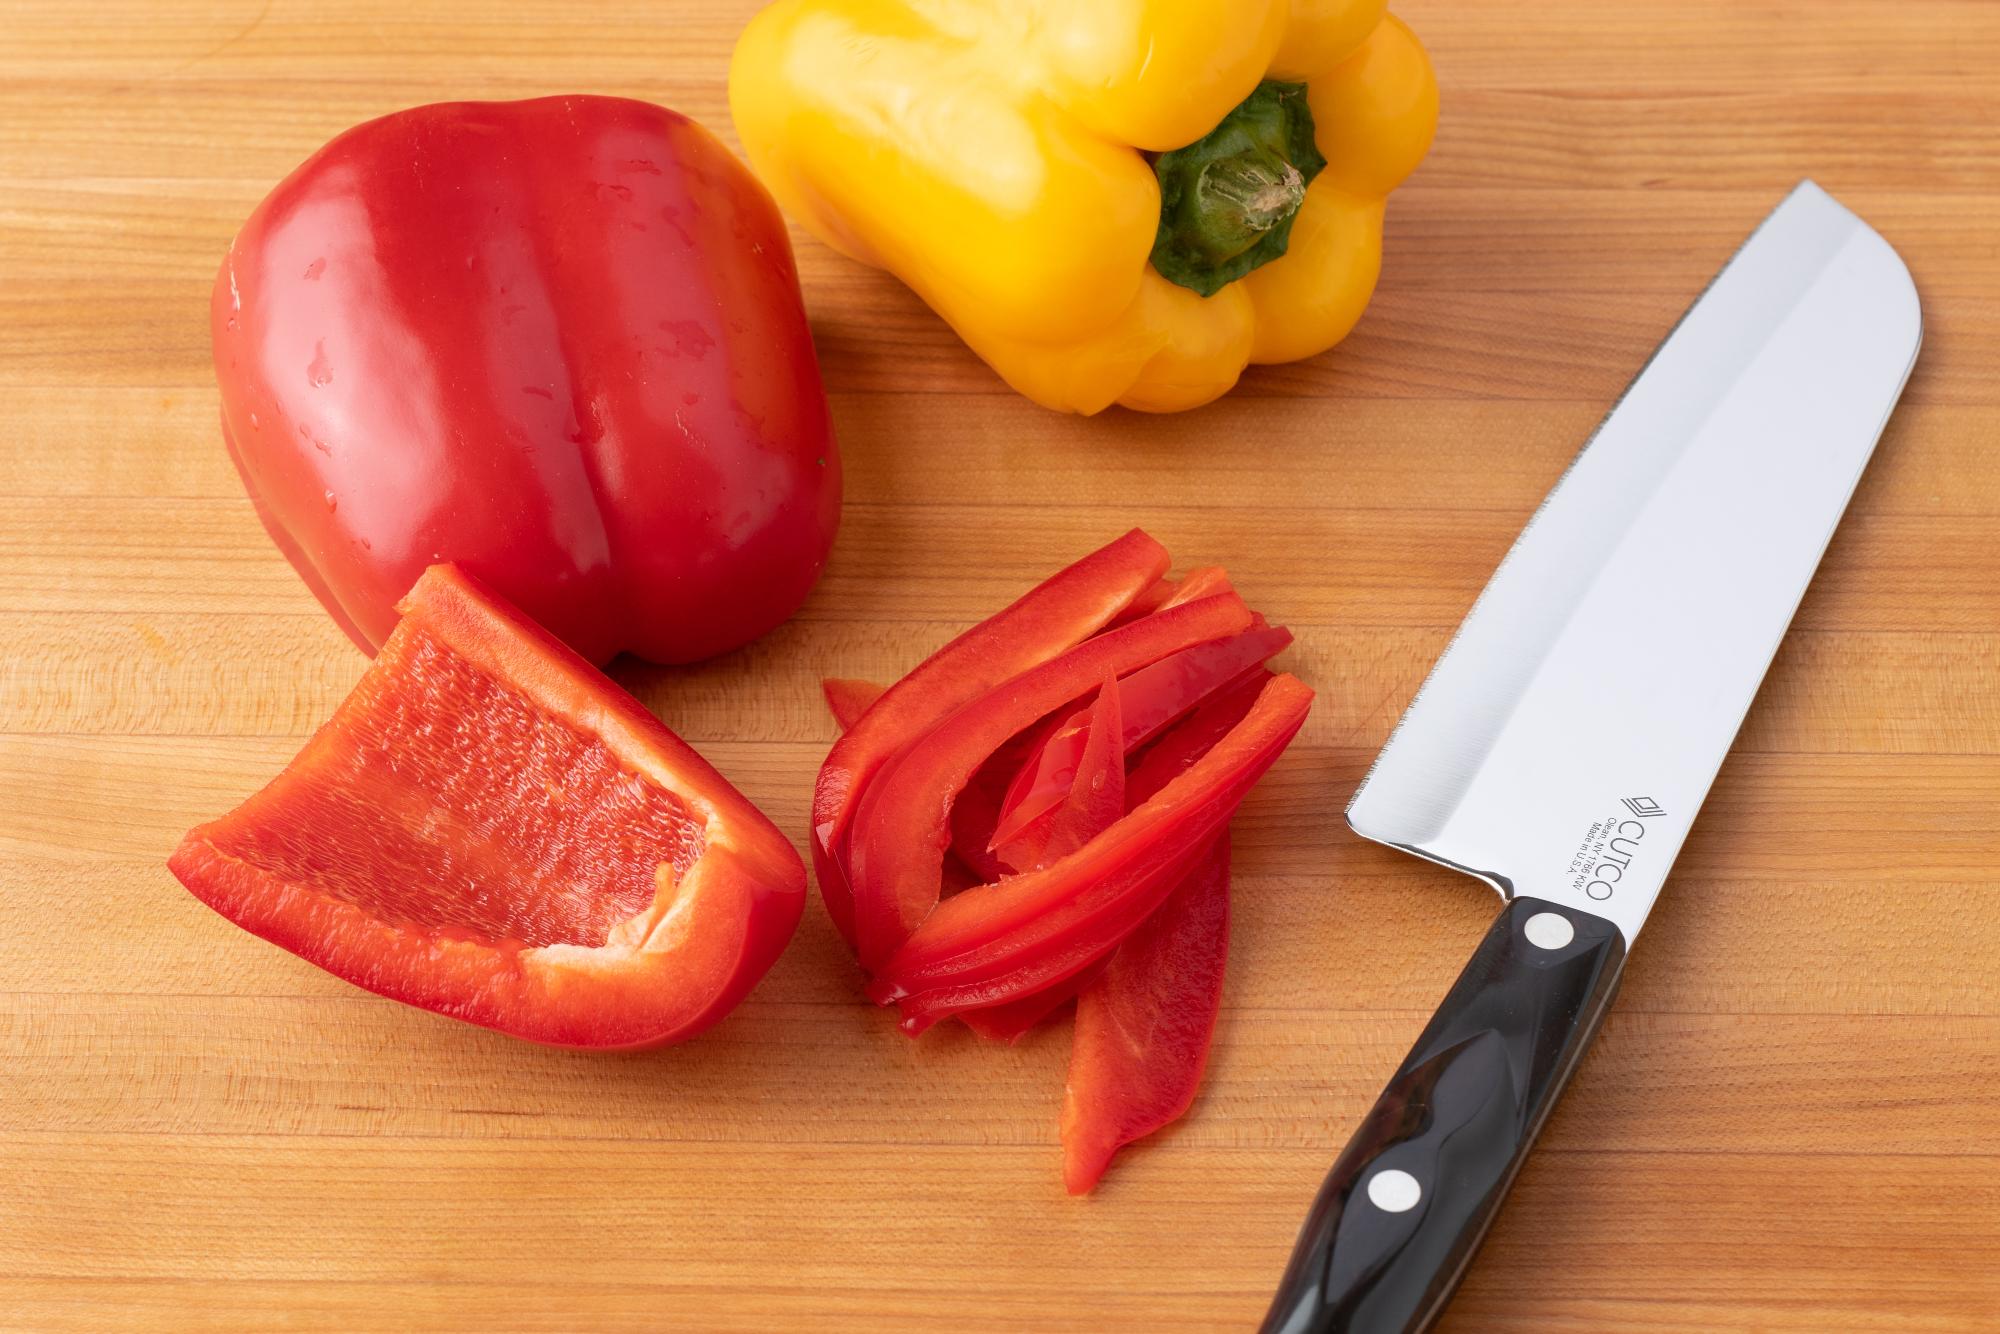 Using a Petite Santoku to slice the peppers.